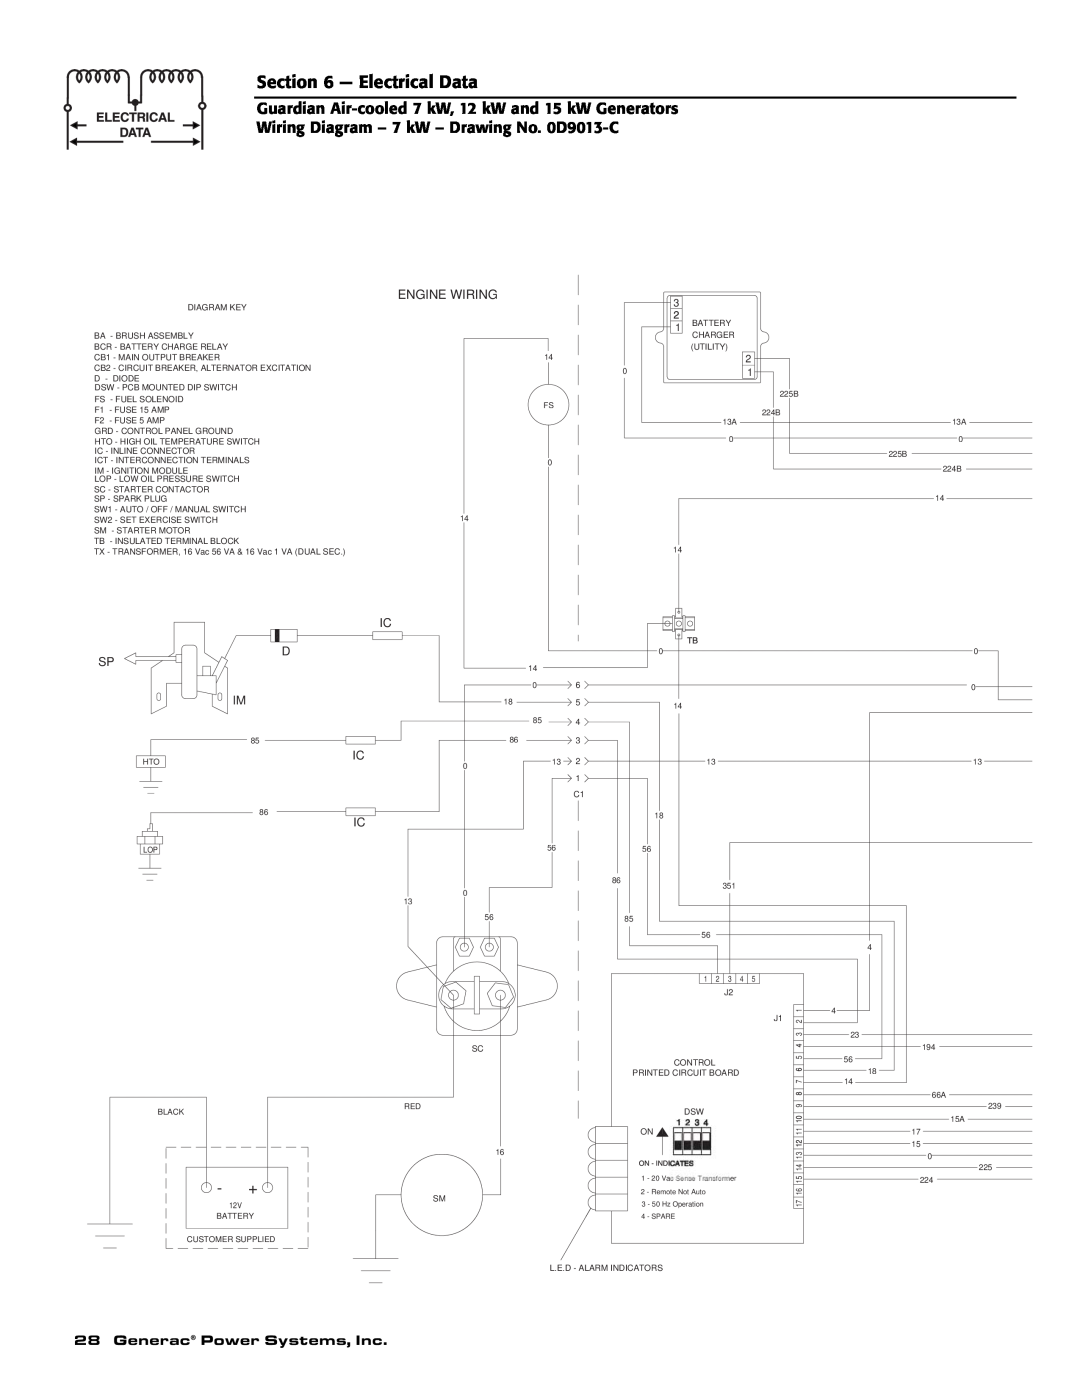 Generac Power Systems 04390-1, 04456-1, 04389-1 owner manual Electrical Data, Generac Power Systems, Inc, Engine Wiring 